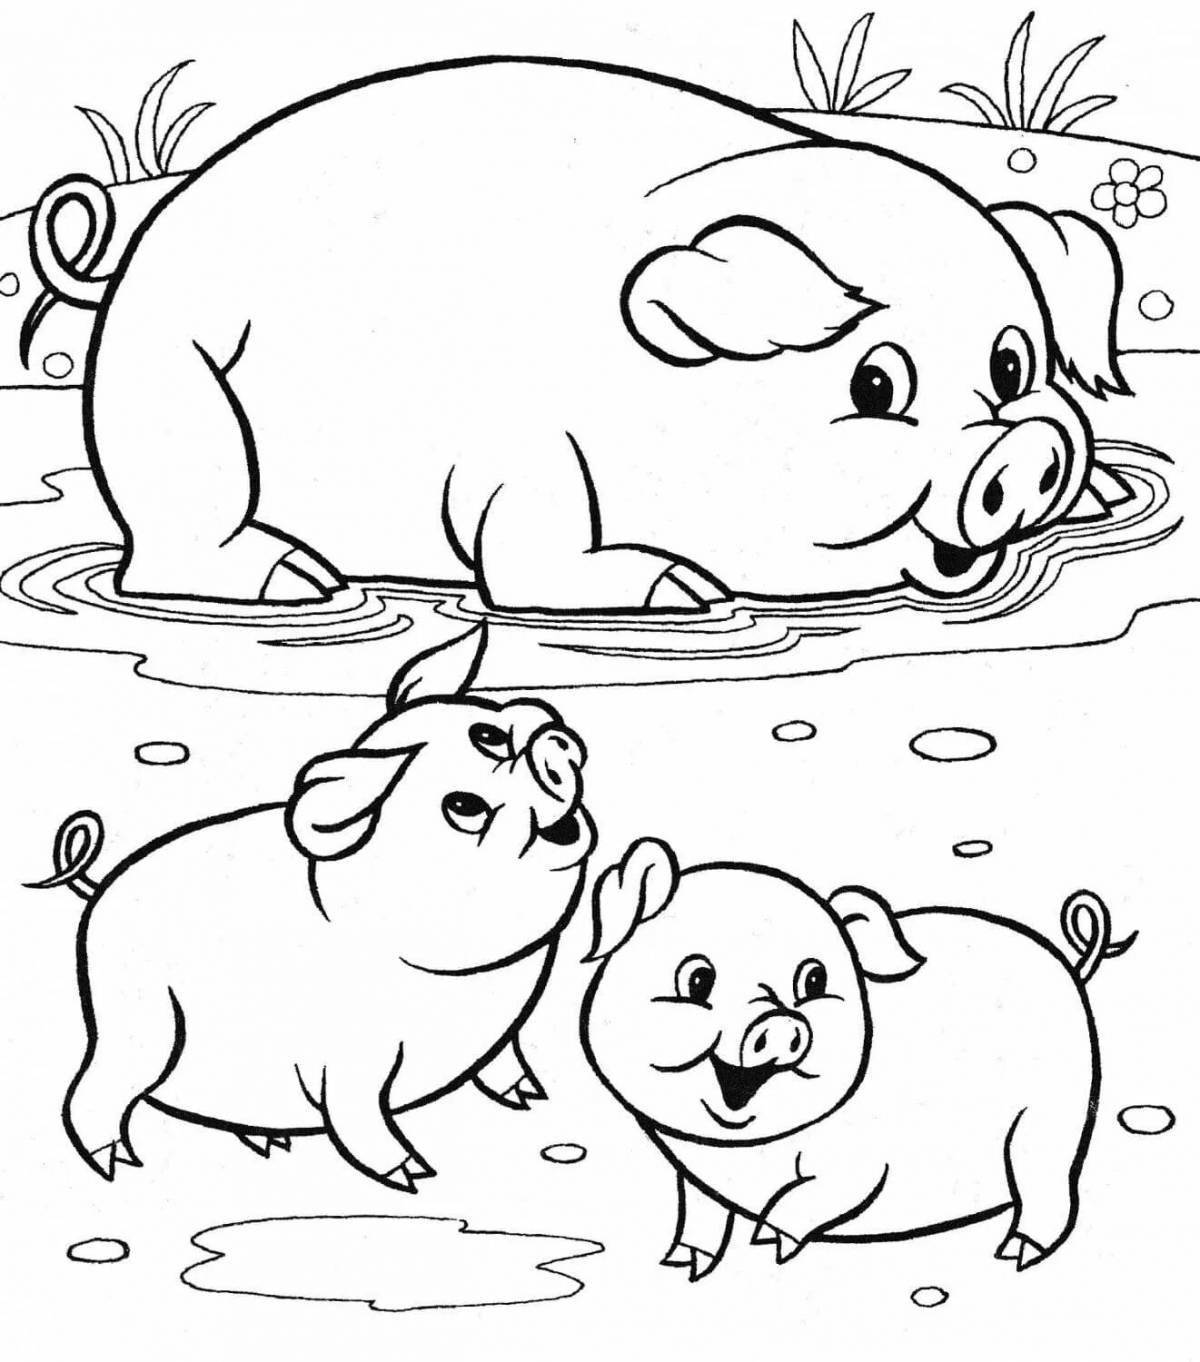 Cute pet coloring page